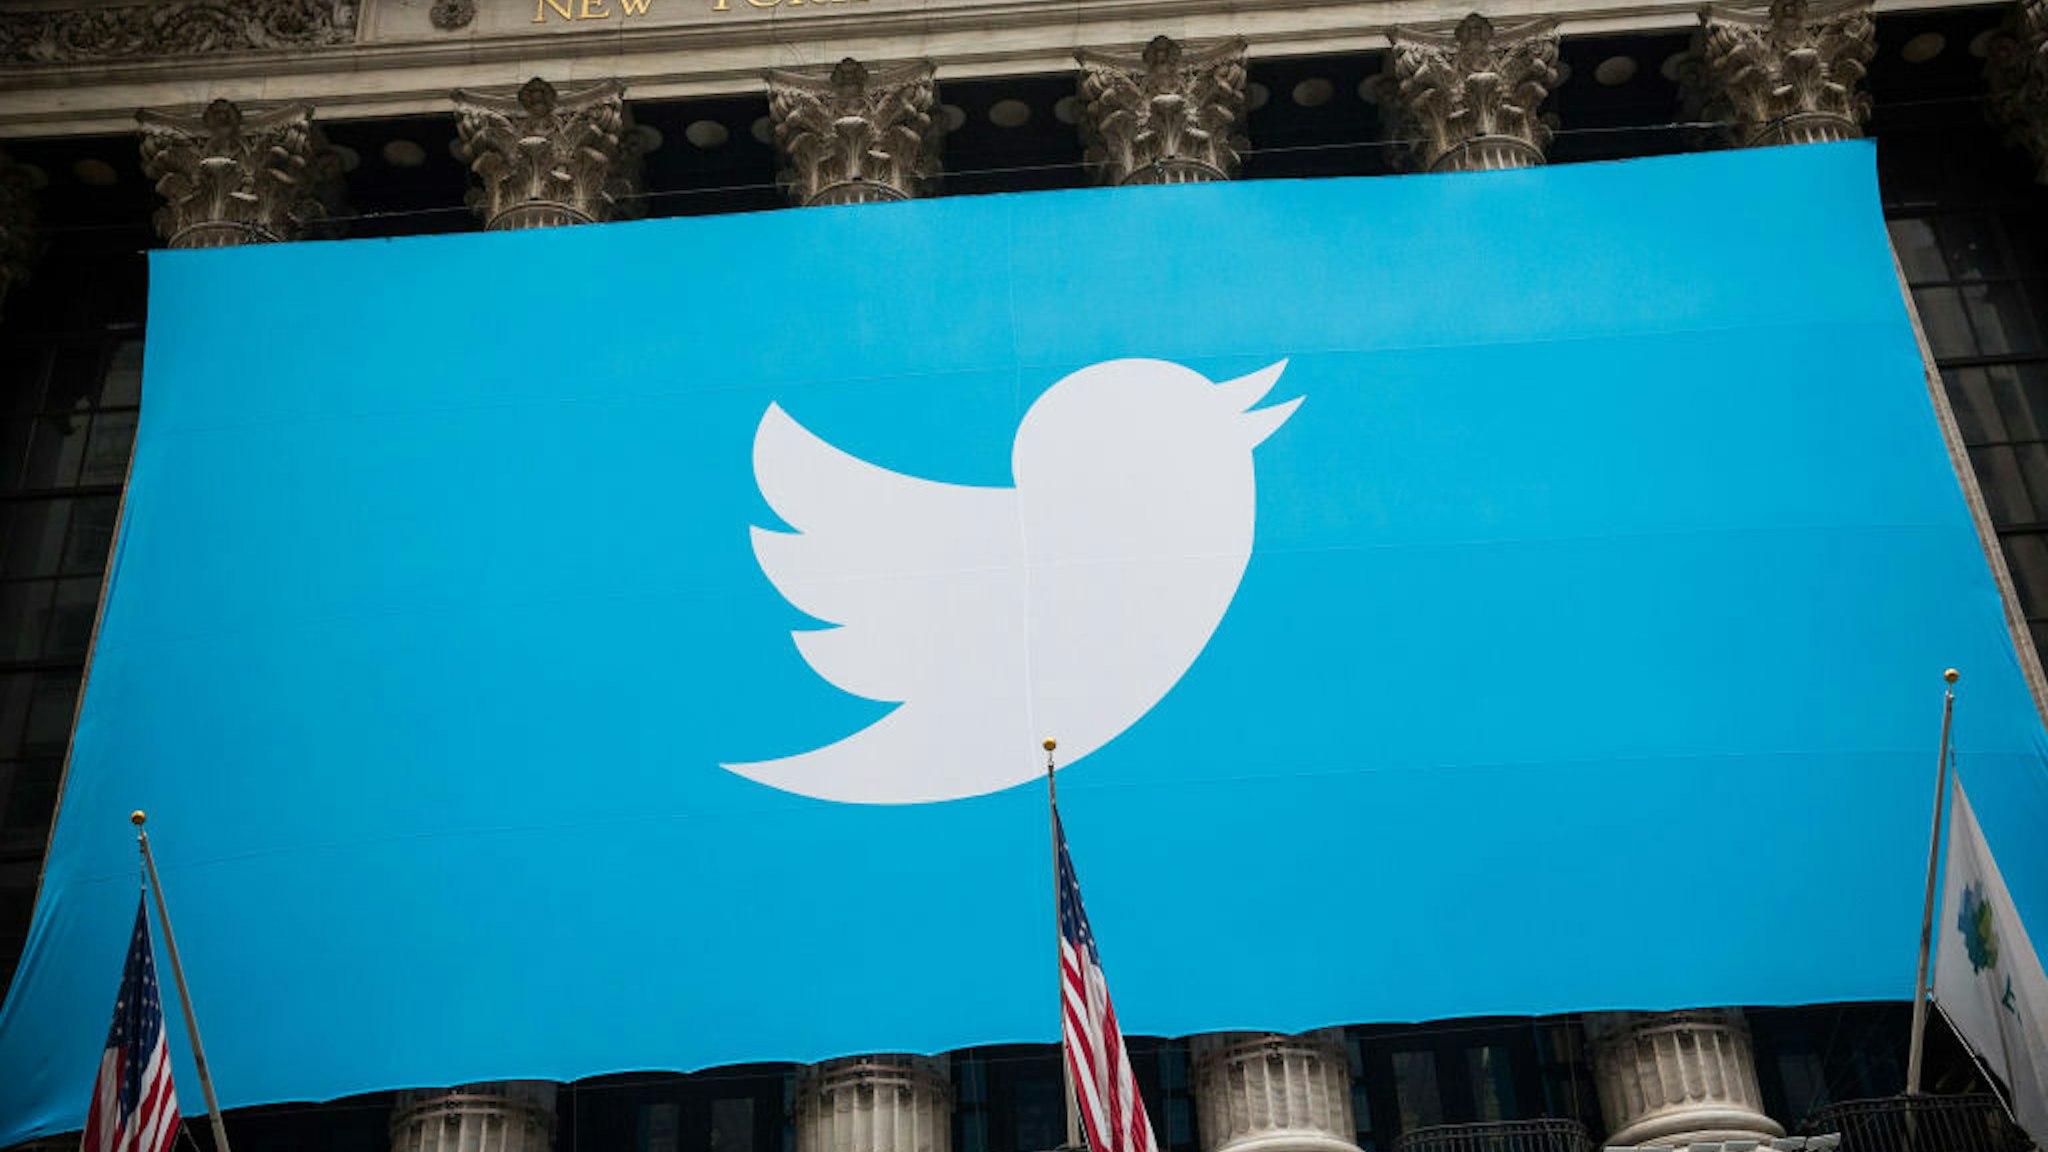 NEW YORK, NY - NOVEMBER 07: The Twitter logo is displayed on a banner outside the New York Stock Exchange (NYSE) on November 7, 2013 in New York City. Twitter goes public on the NYSE today and is expected to open at USD 26 per share, making the company worth an estimated USD 18 billion. (Photo by Andrew Burton/Getty Images)